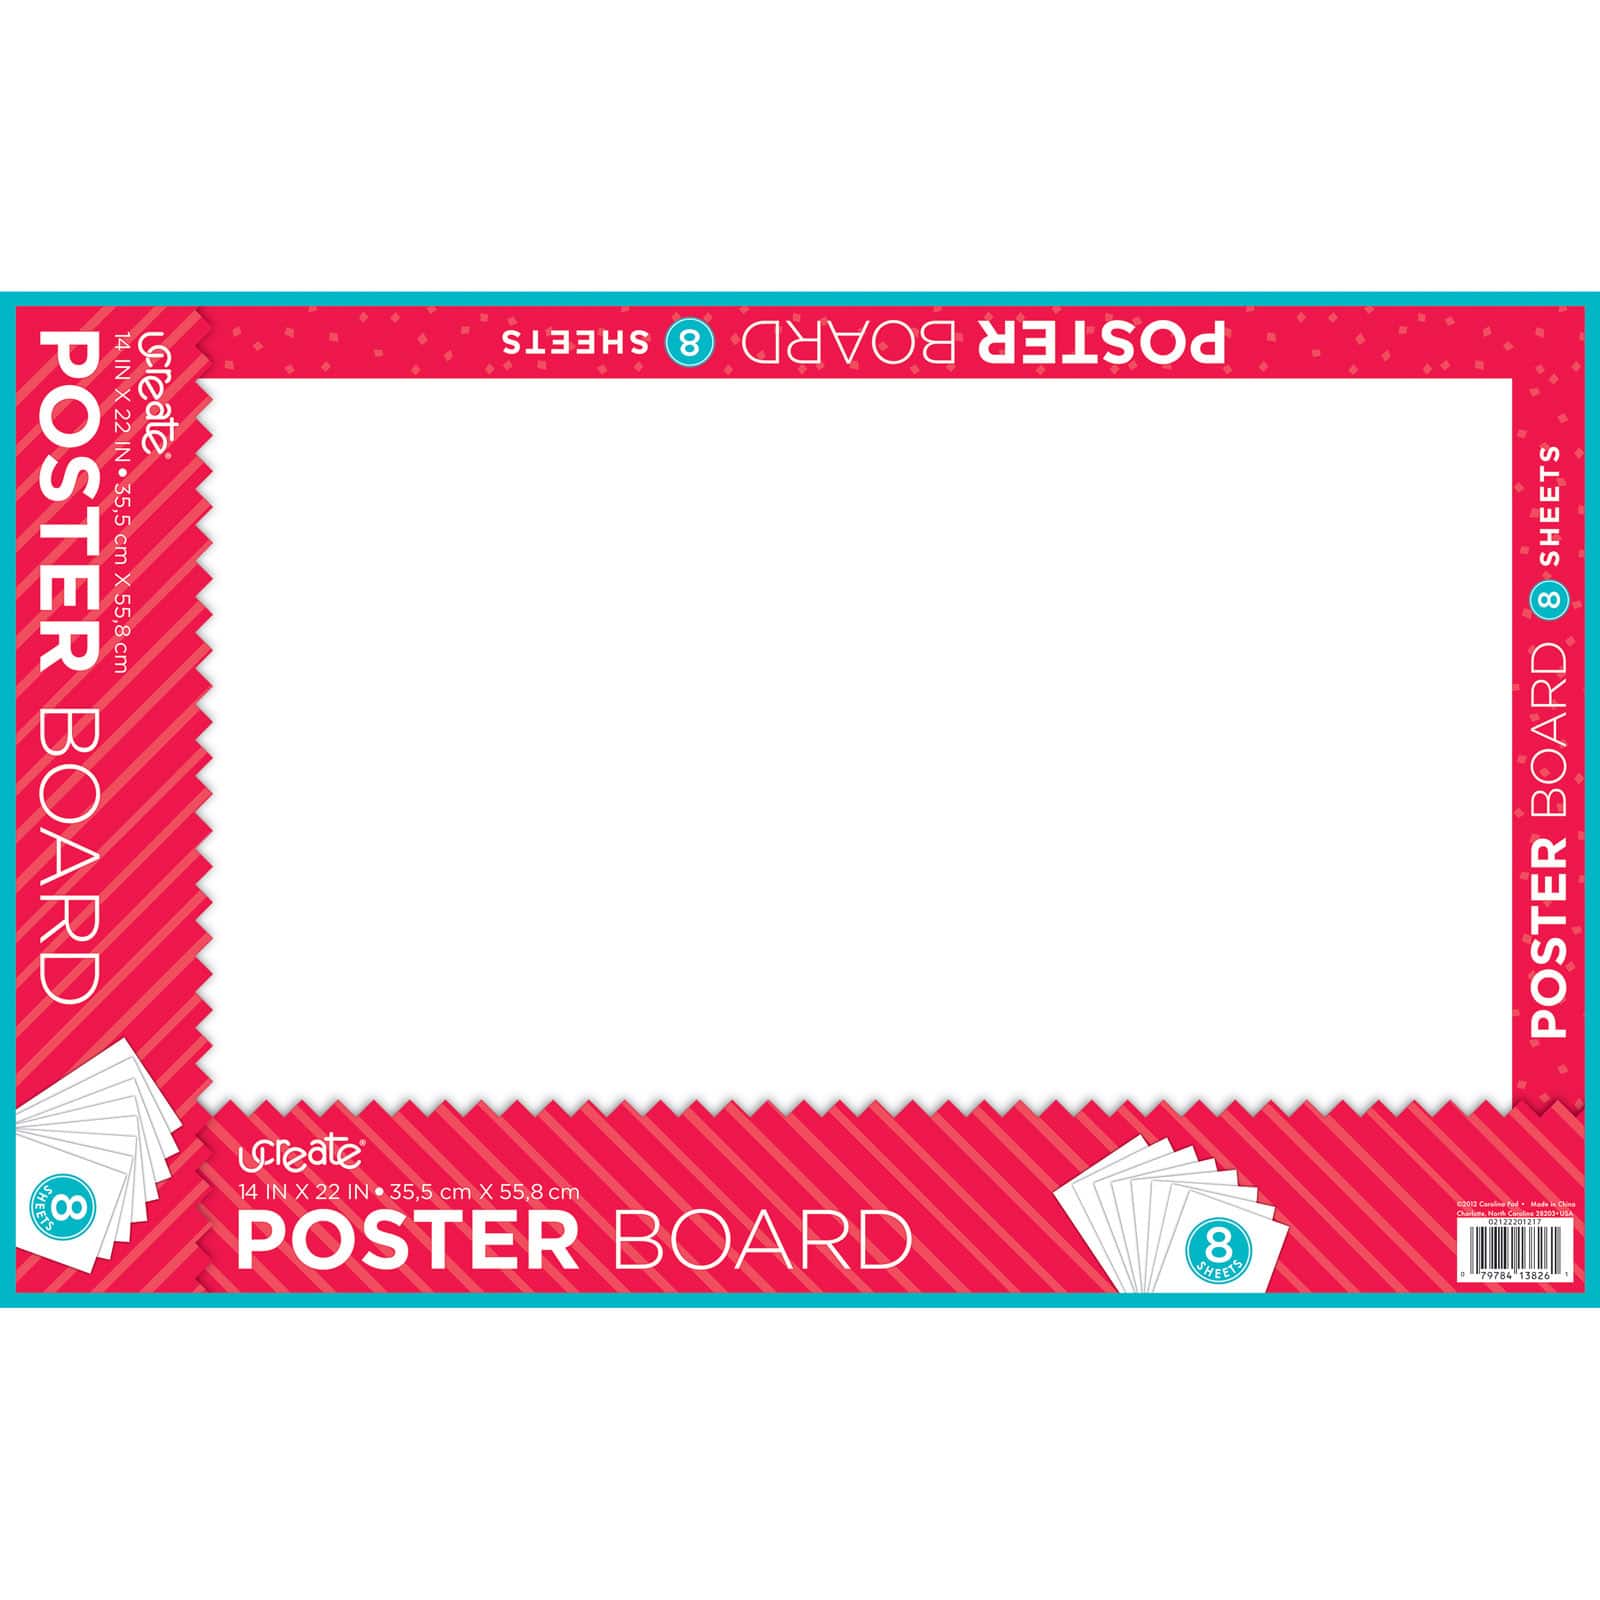 Ucreate Poster Display Boards, White, 11 x 14, 5 Sheets